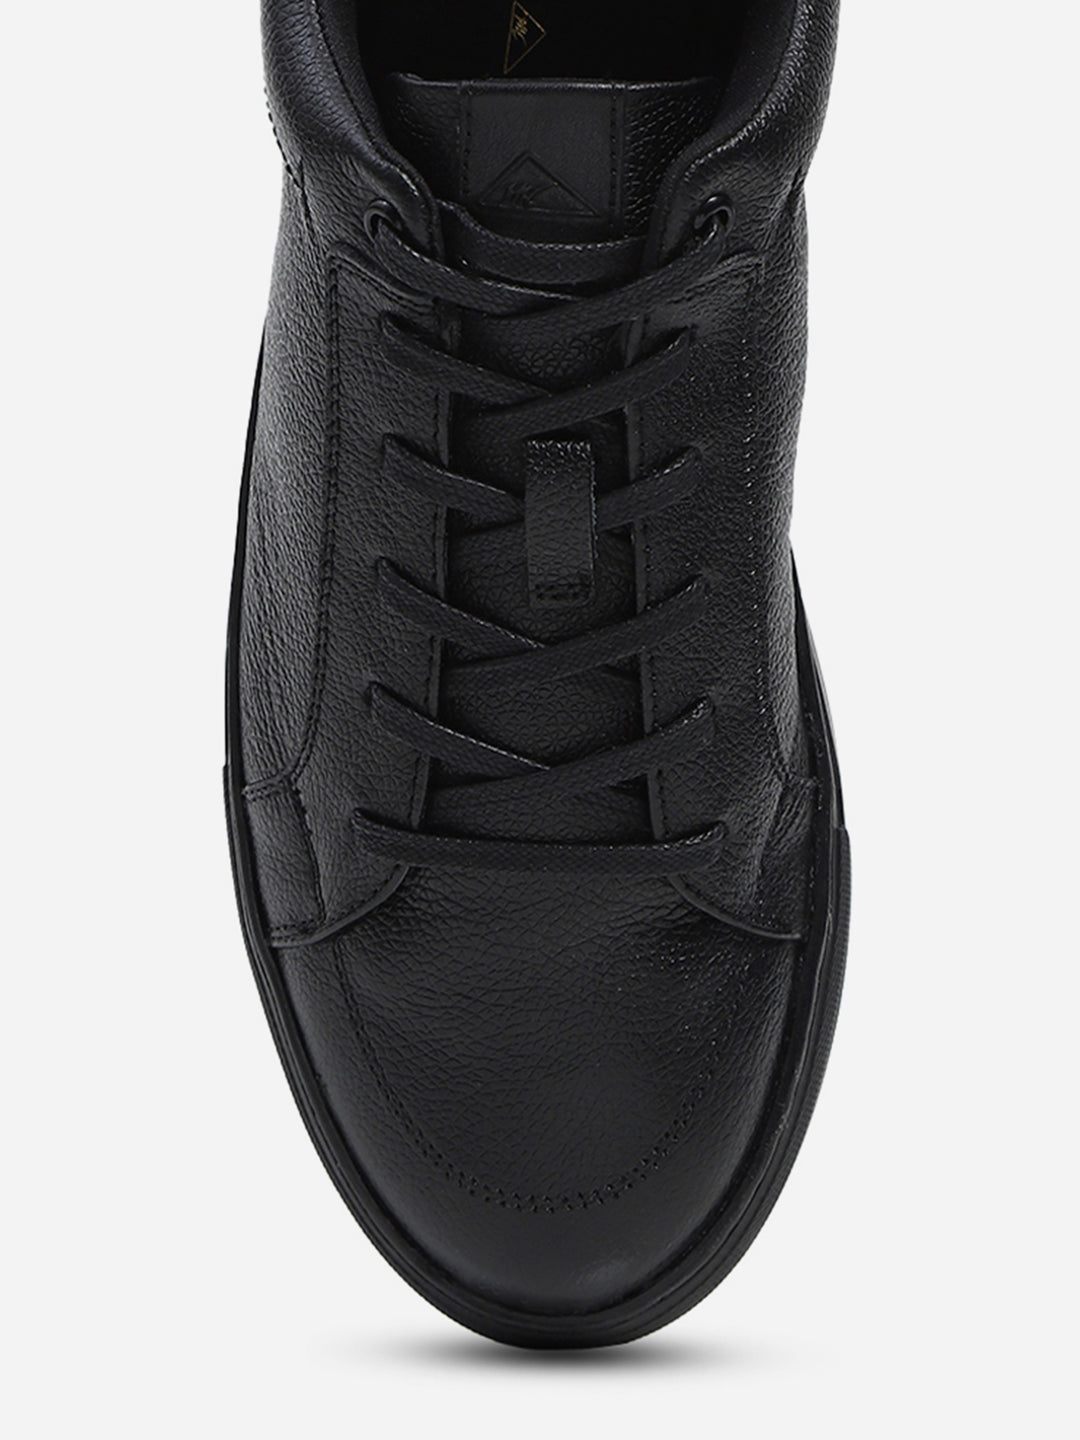 Men Black Lace Up Genuine Leather Casual Sneakers